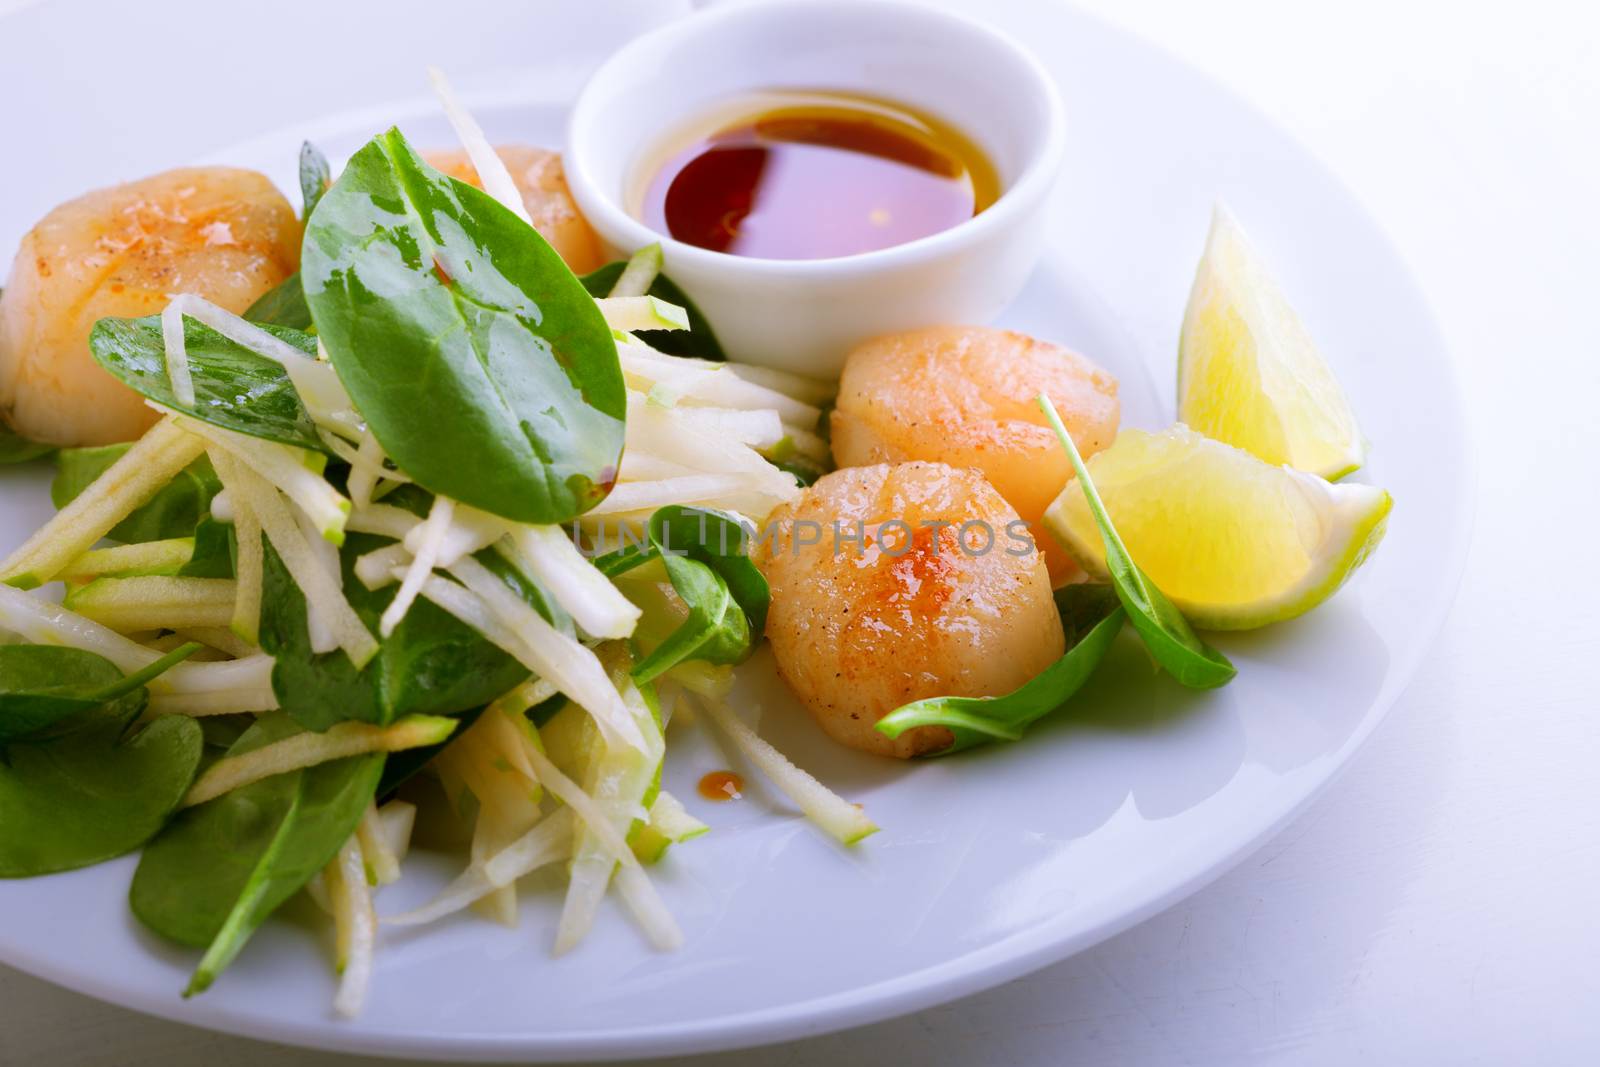 Scallop Salad with greenery by supercat67